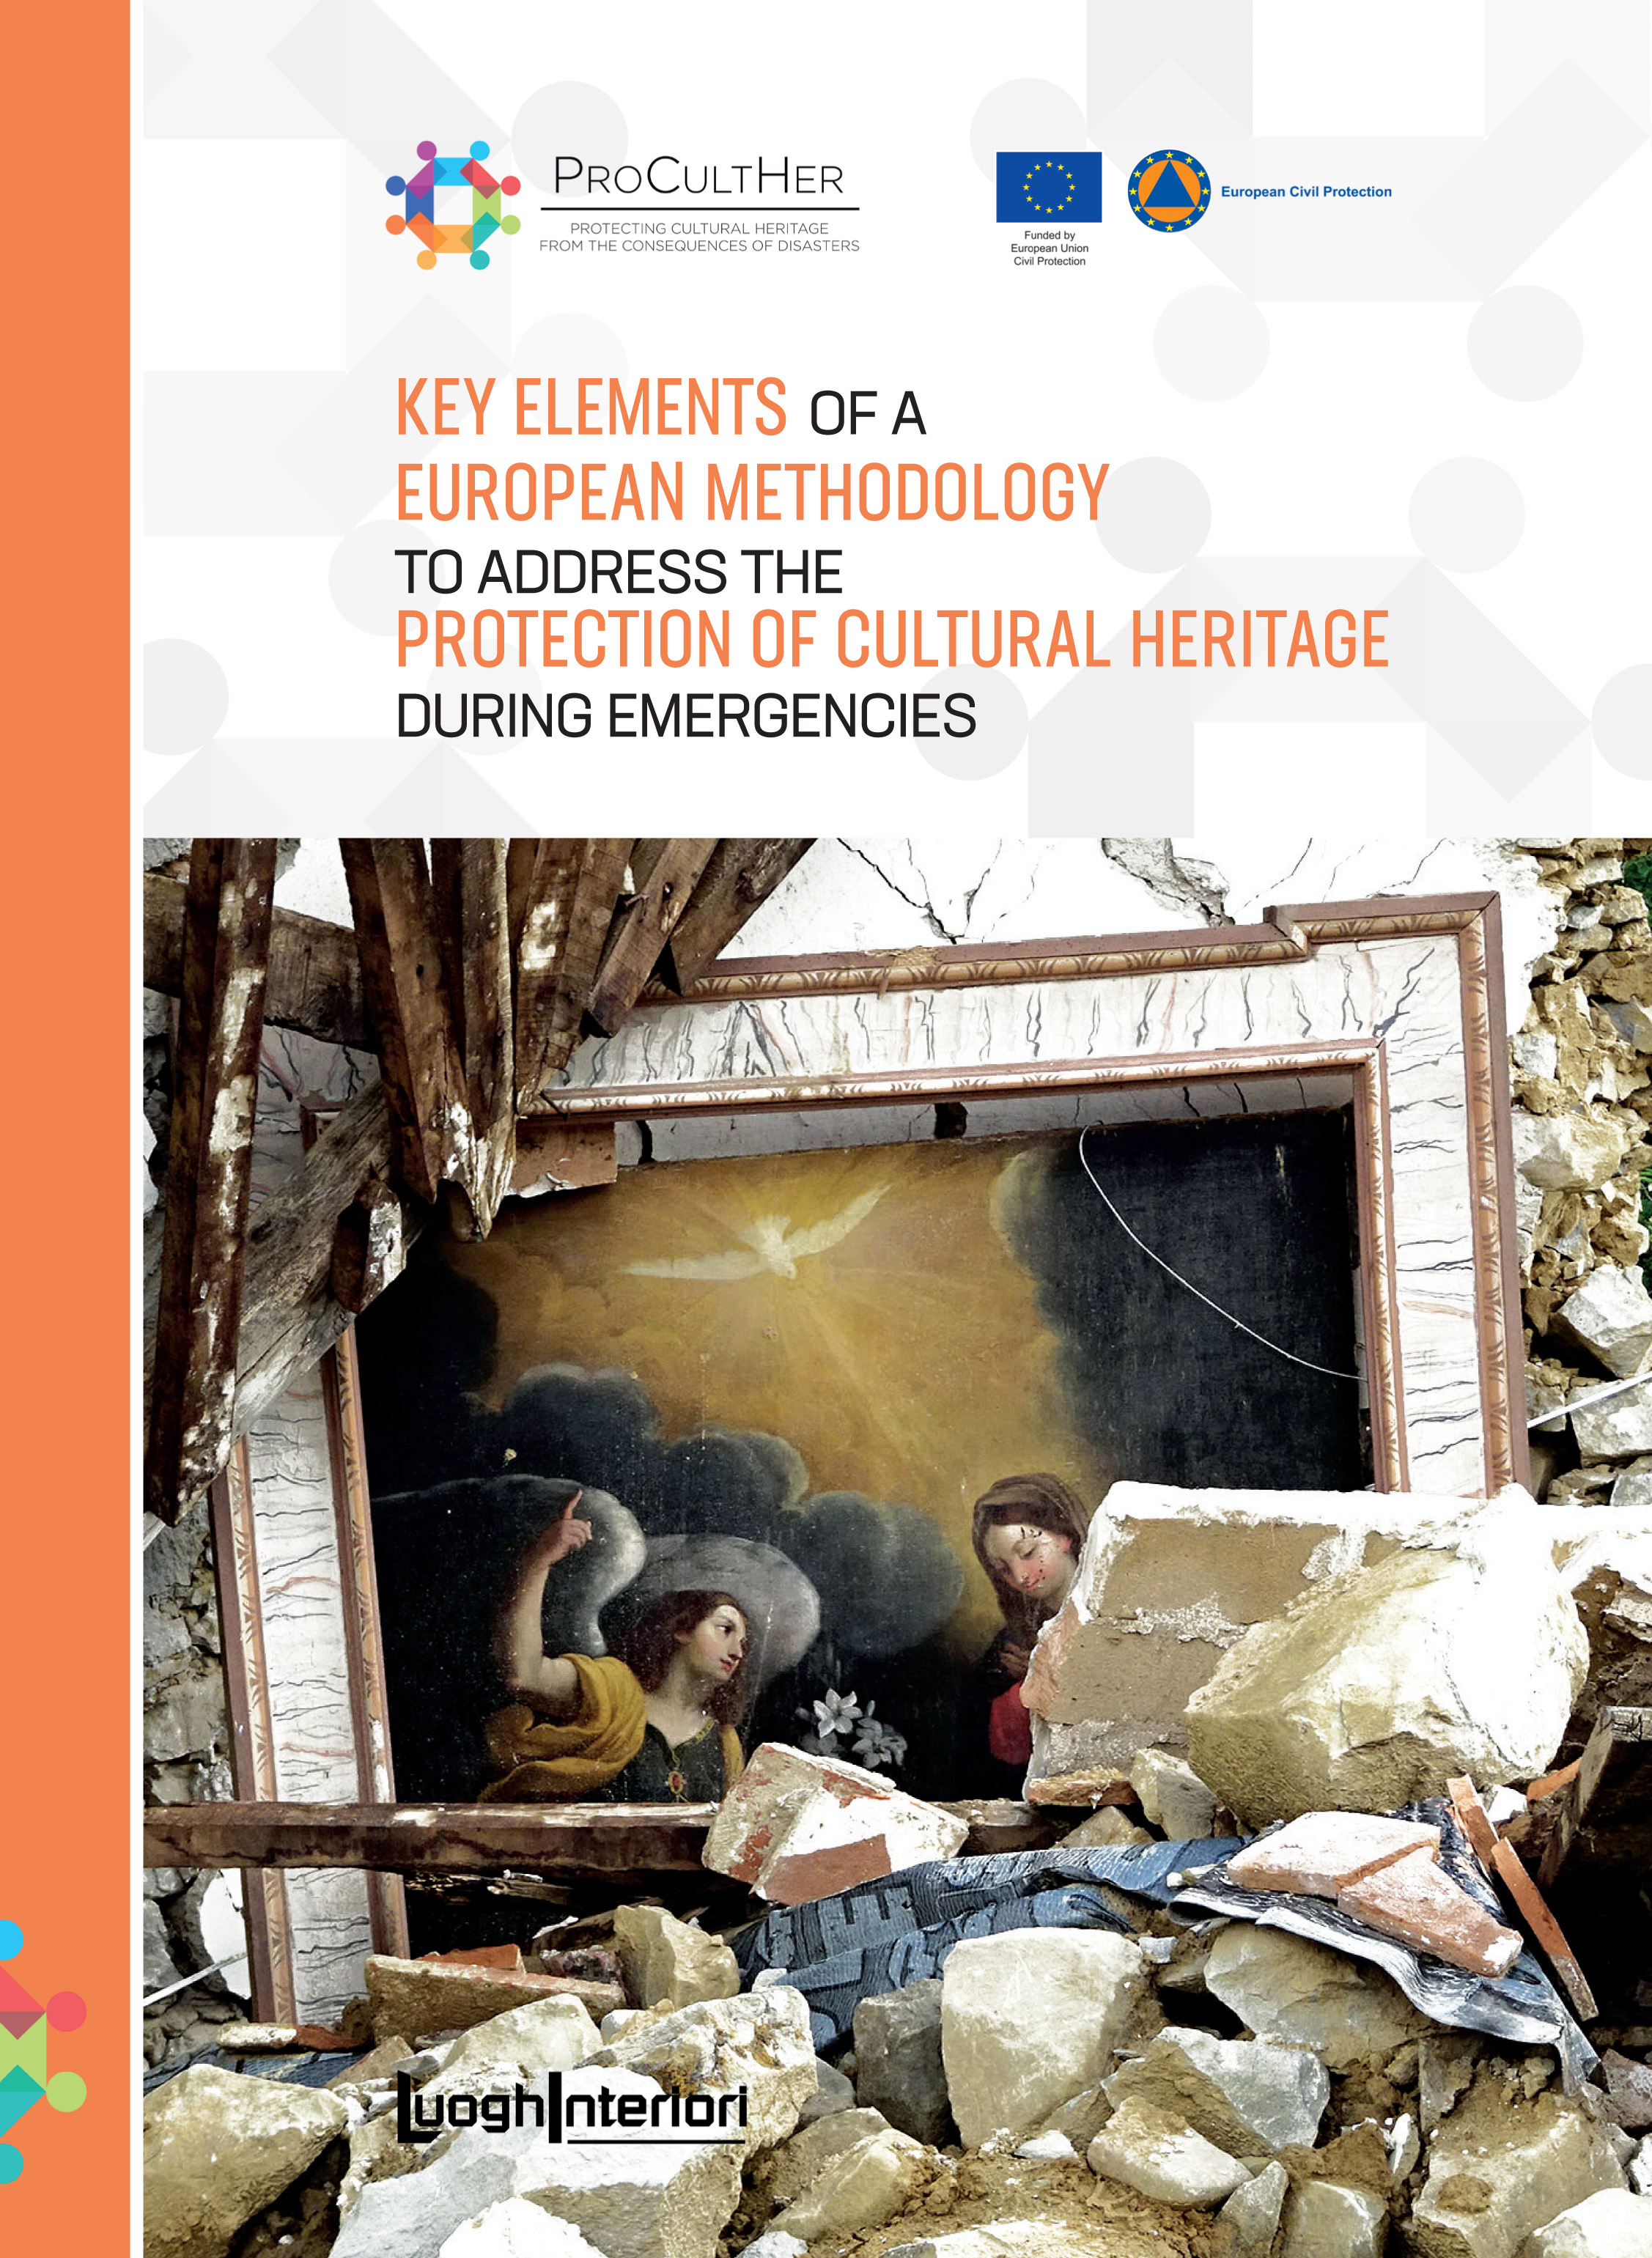 THE “KEY ELEMENTS OF A EUROPEAN METHODOLOGY TO ADDRESS THE PROTECTION OF CULTURAL HERITAGE DURING EMERGENCIES”